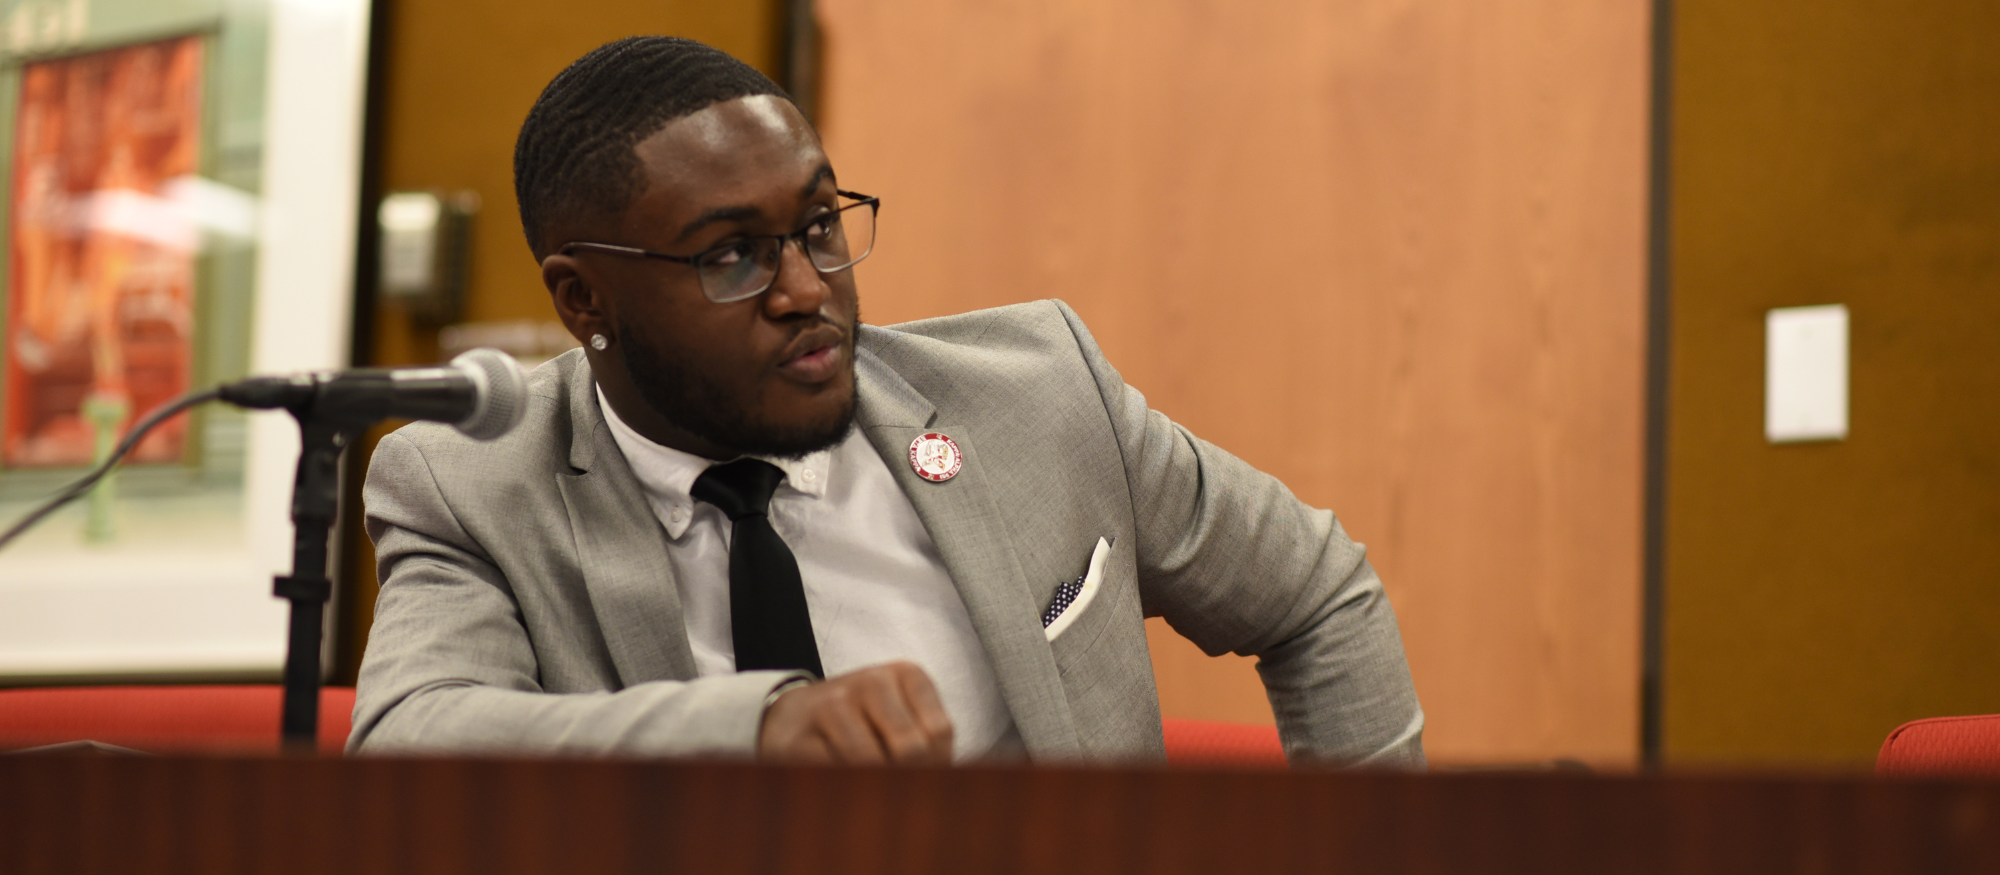 Travis Henderson, a junior in the Business Administration program, joins the Board of Trustees as the new Student Representative during the Regular Meeting of the Board of Trustees held on the Van Ness Campus on June 8.